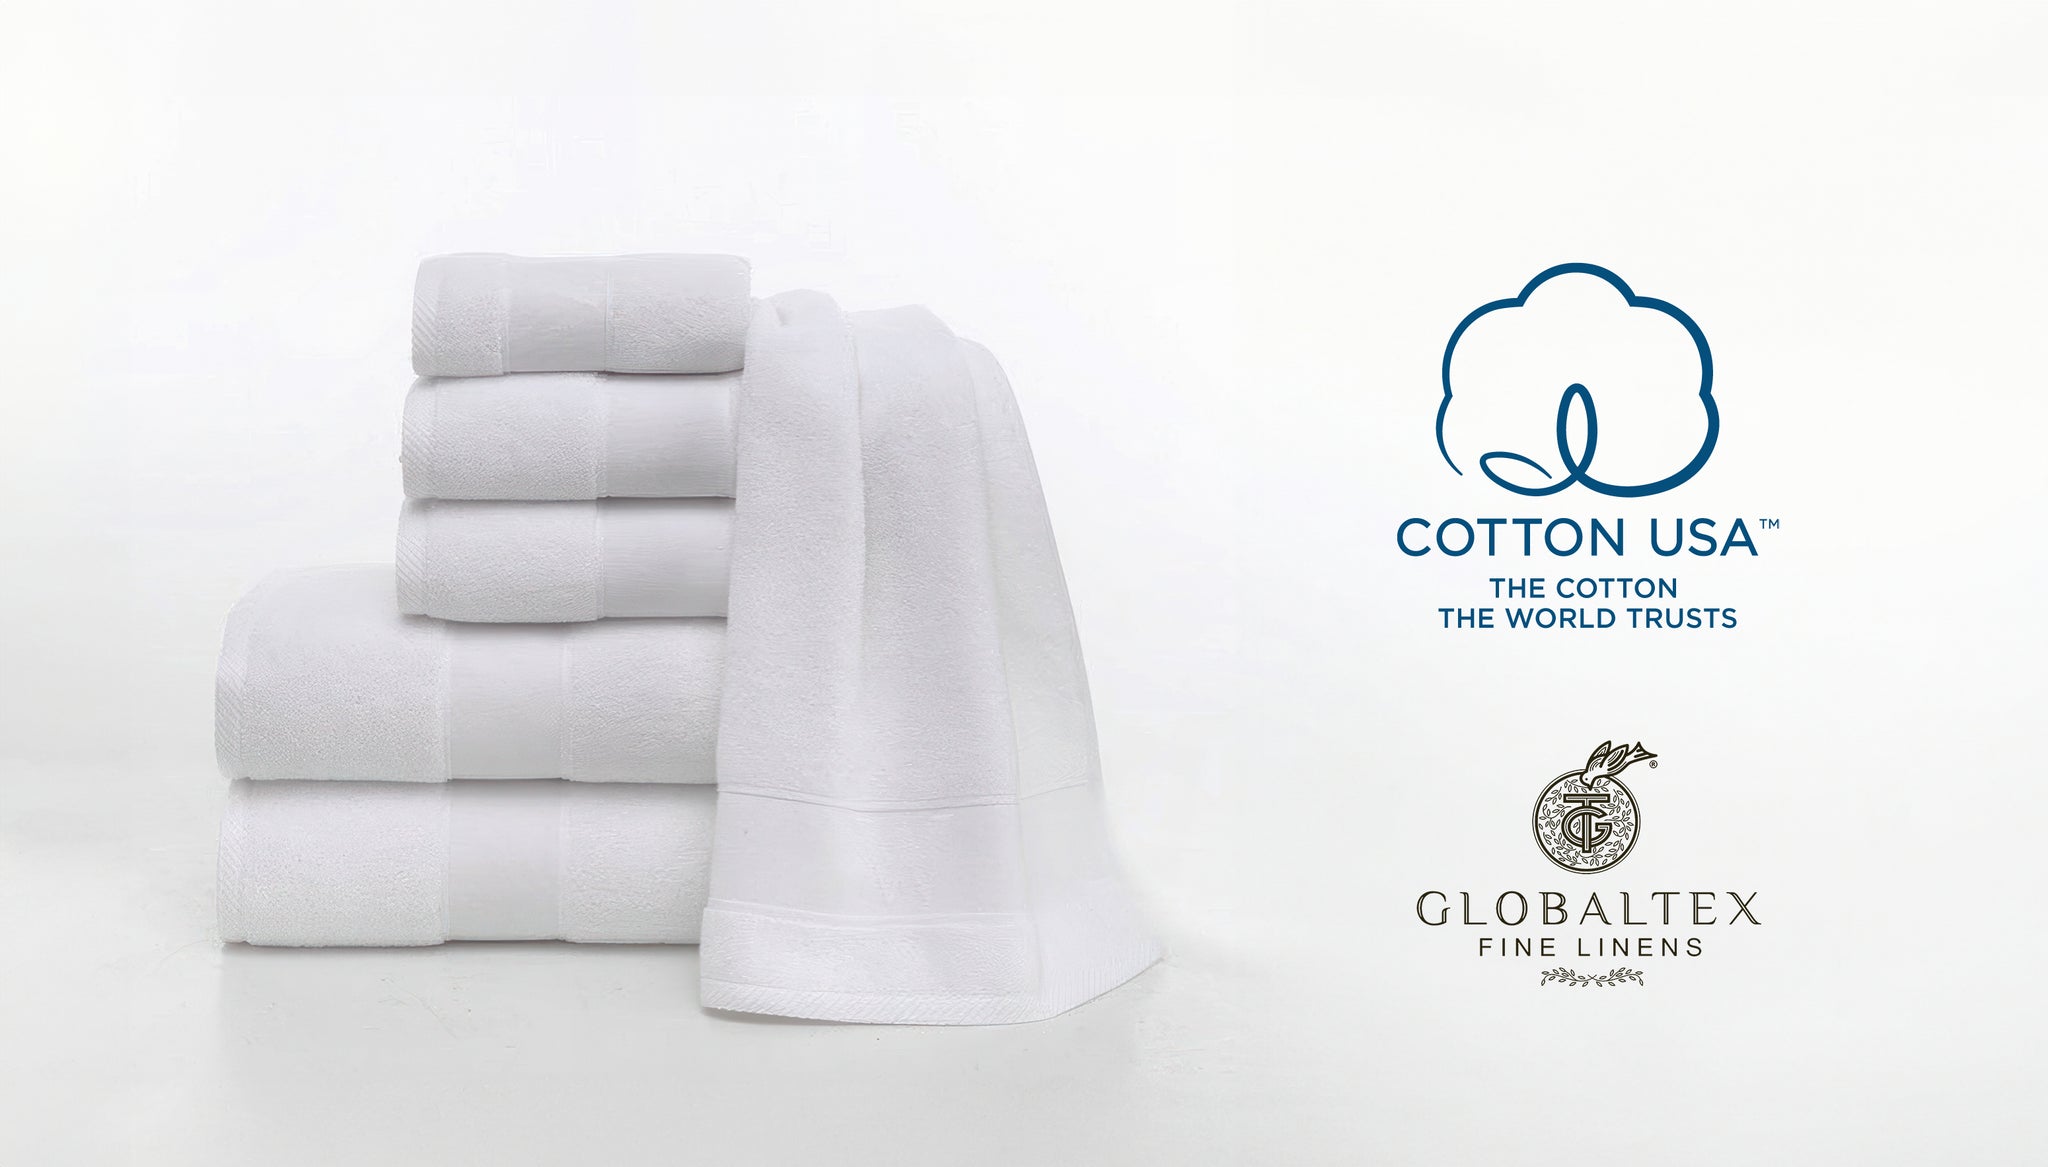 Globaltex Fine Linens Renews Commitment to Excellence with Updated Cotton USA Certification